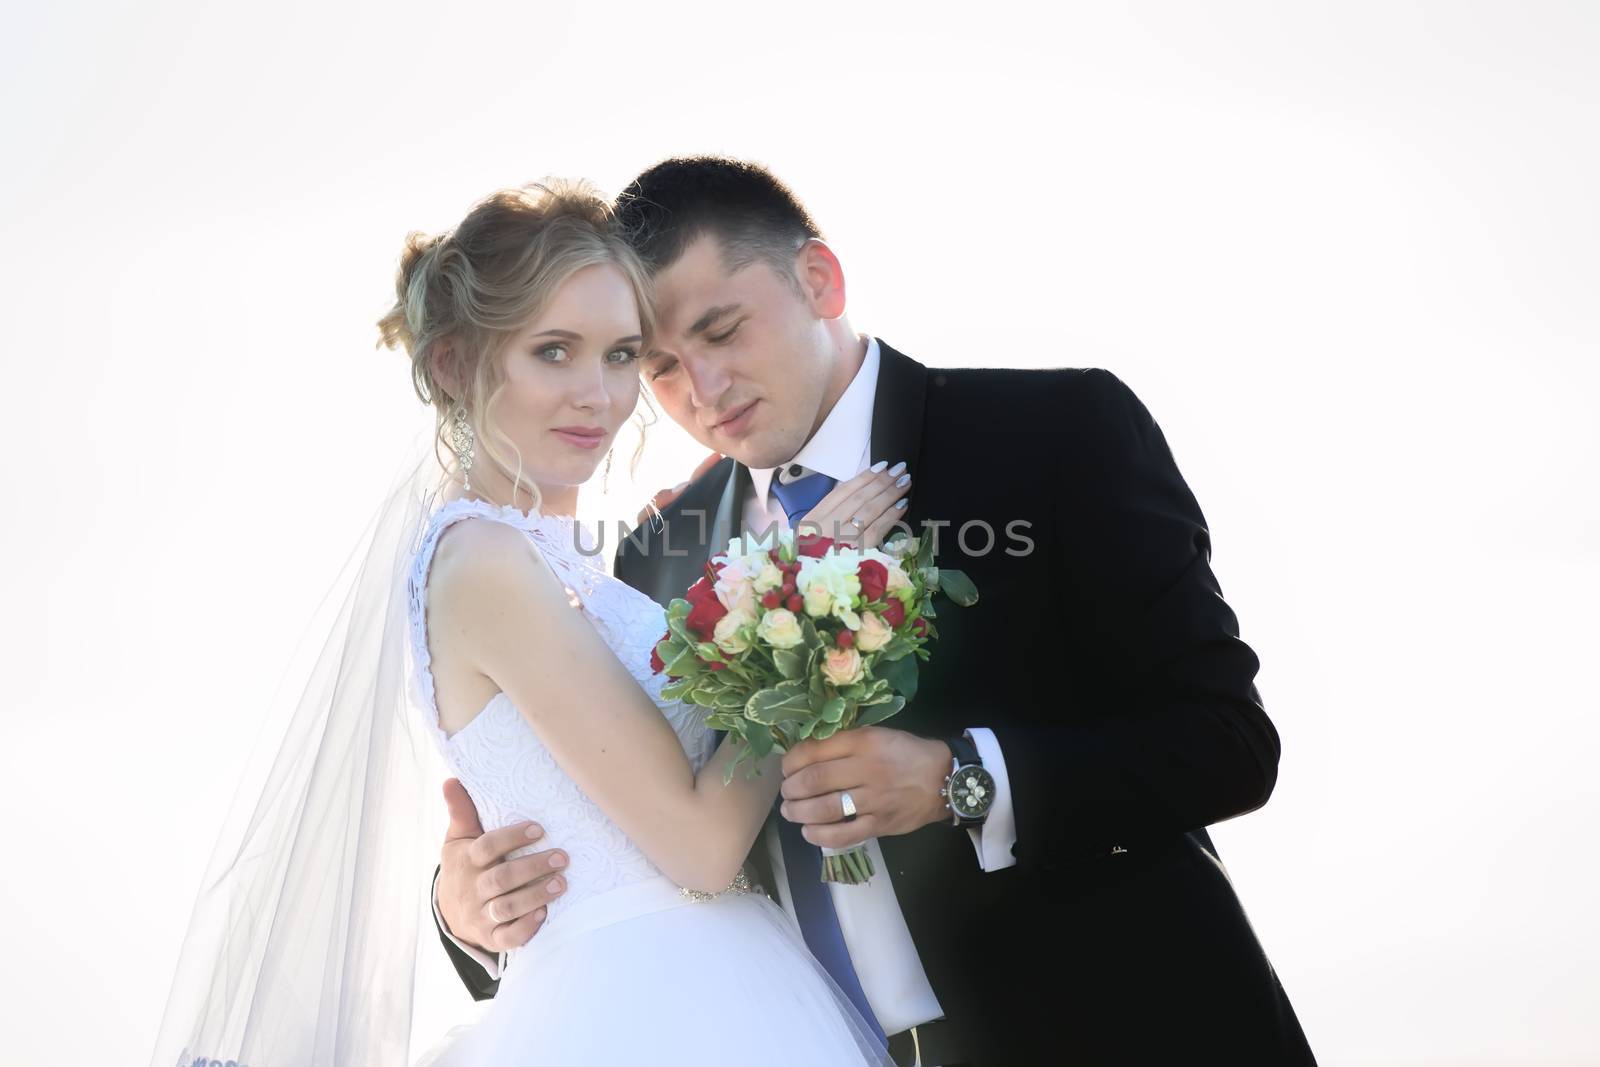 Bride and groom on wedding day with bouquet